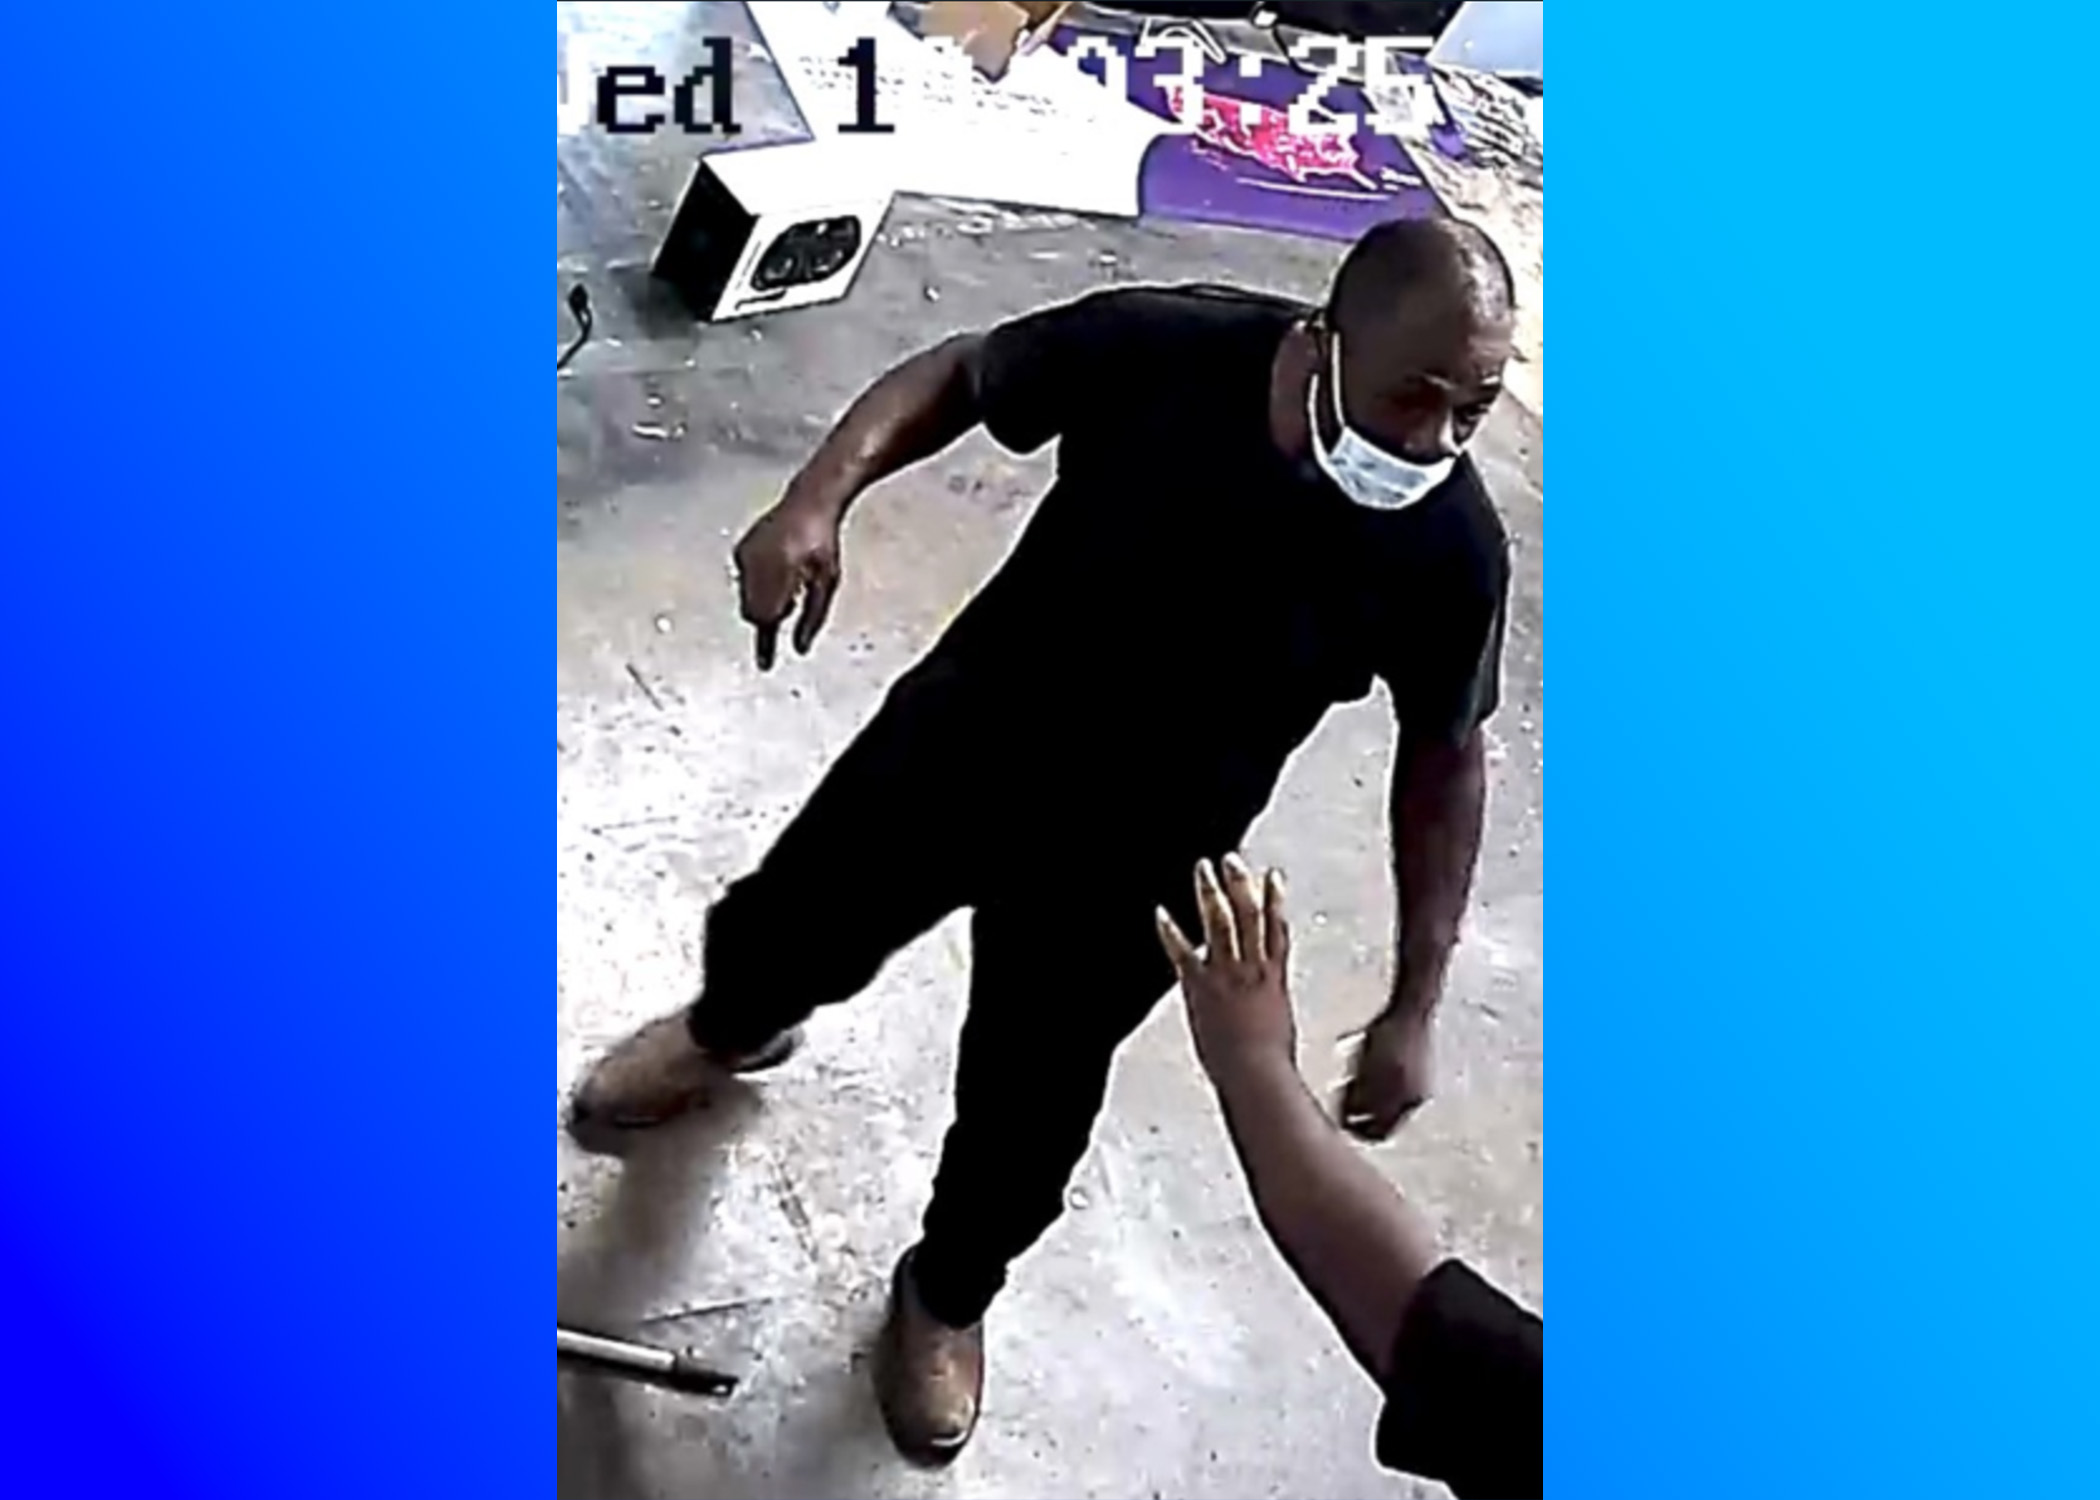 Suspect sought in connection to multiple robberies in Birmingham